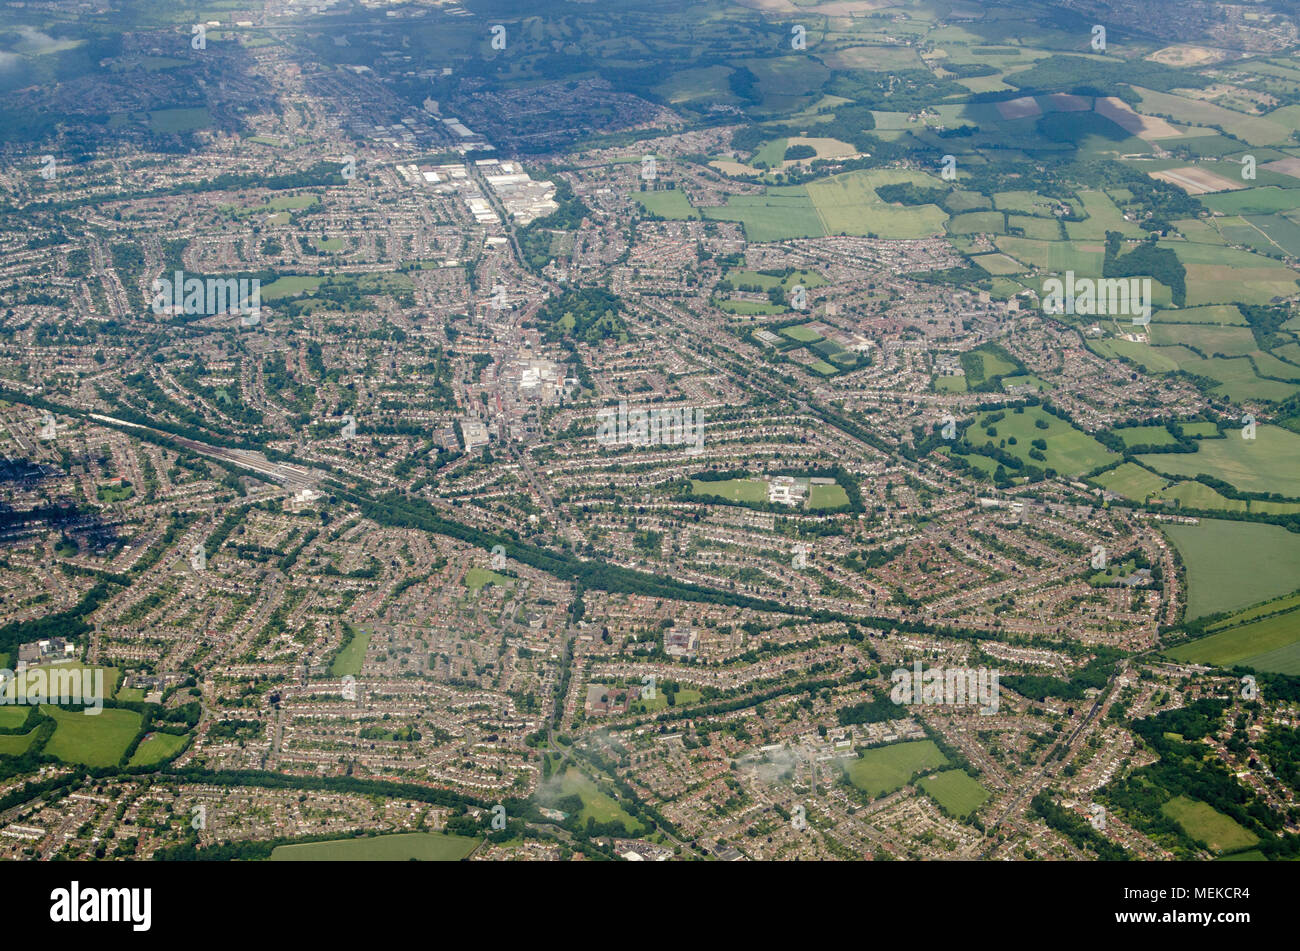 Aerial view of the suburb of Orpington in the London Borough of Bromley.  Viewed from a plane on a sunny summer afternoon. Stock Photo